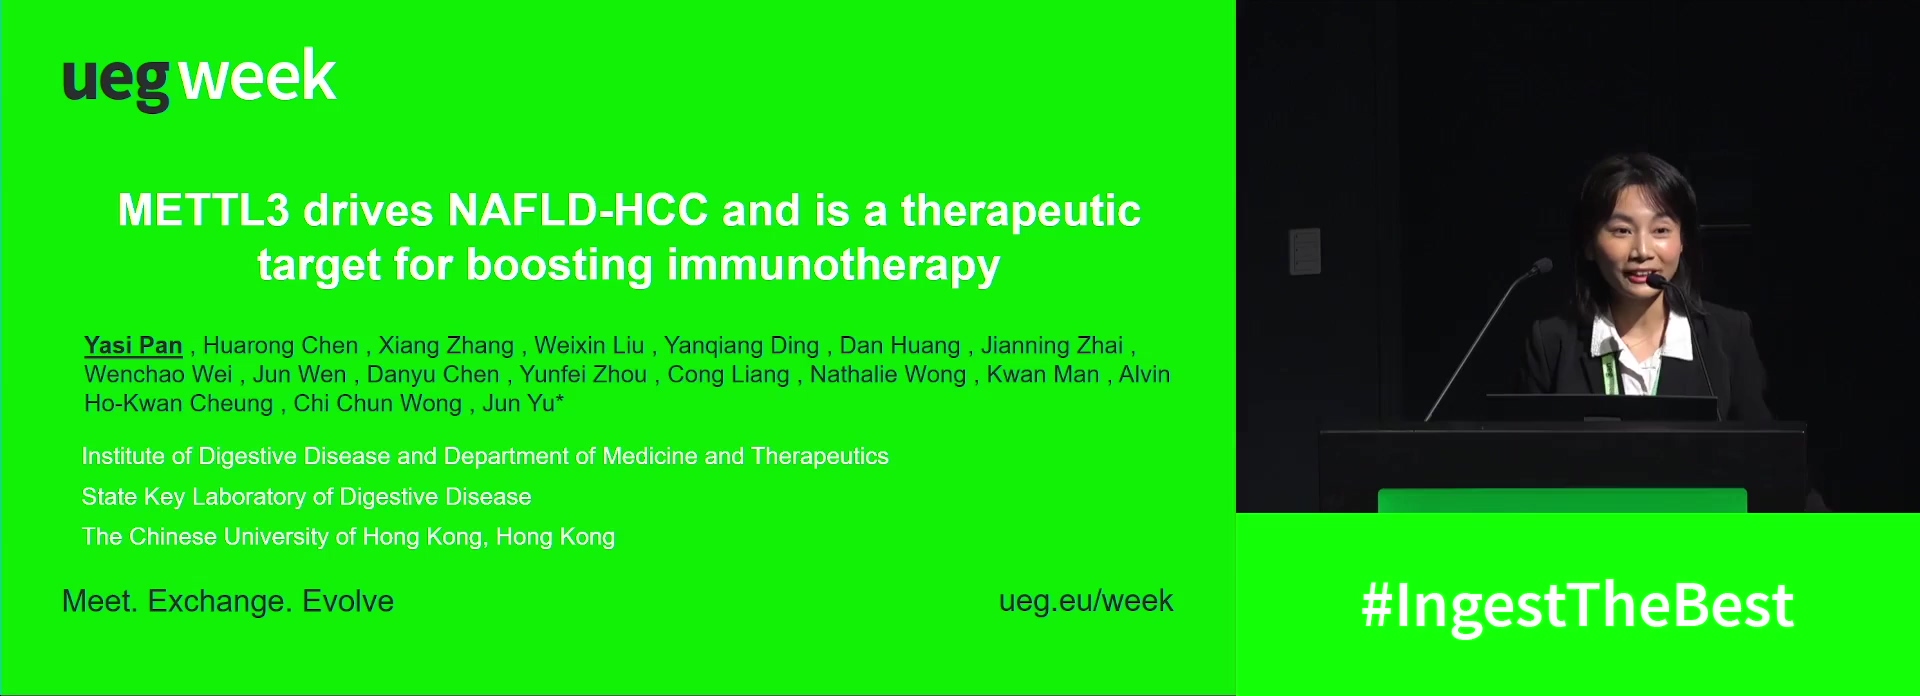 RNA N6-METHYLADENOSINE METHYLTRANSFERASE METTL3 DRIVES NAFLD-HCC AND IS A THERAPEUTIC TARGET FOR BOOSTING IMMUNOTHERAPY